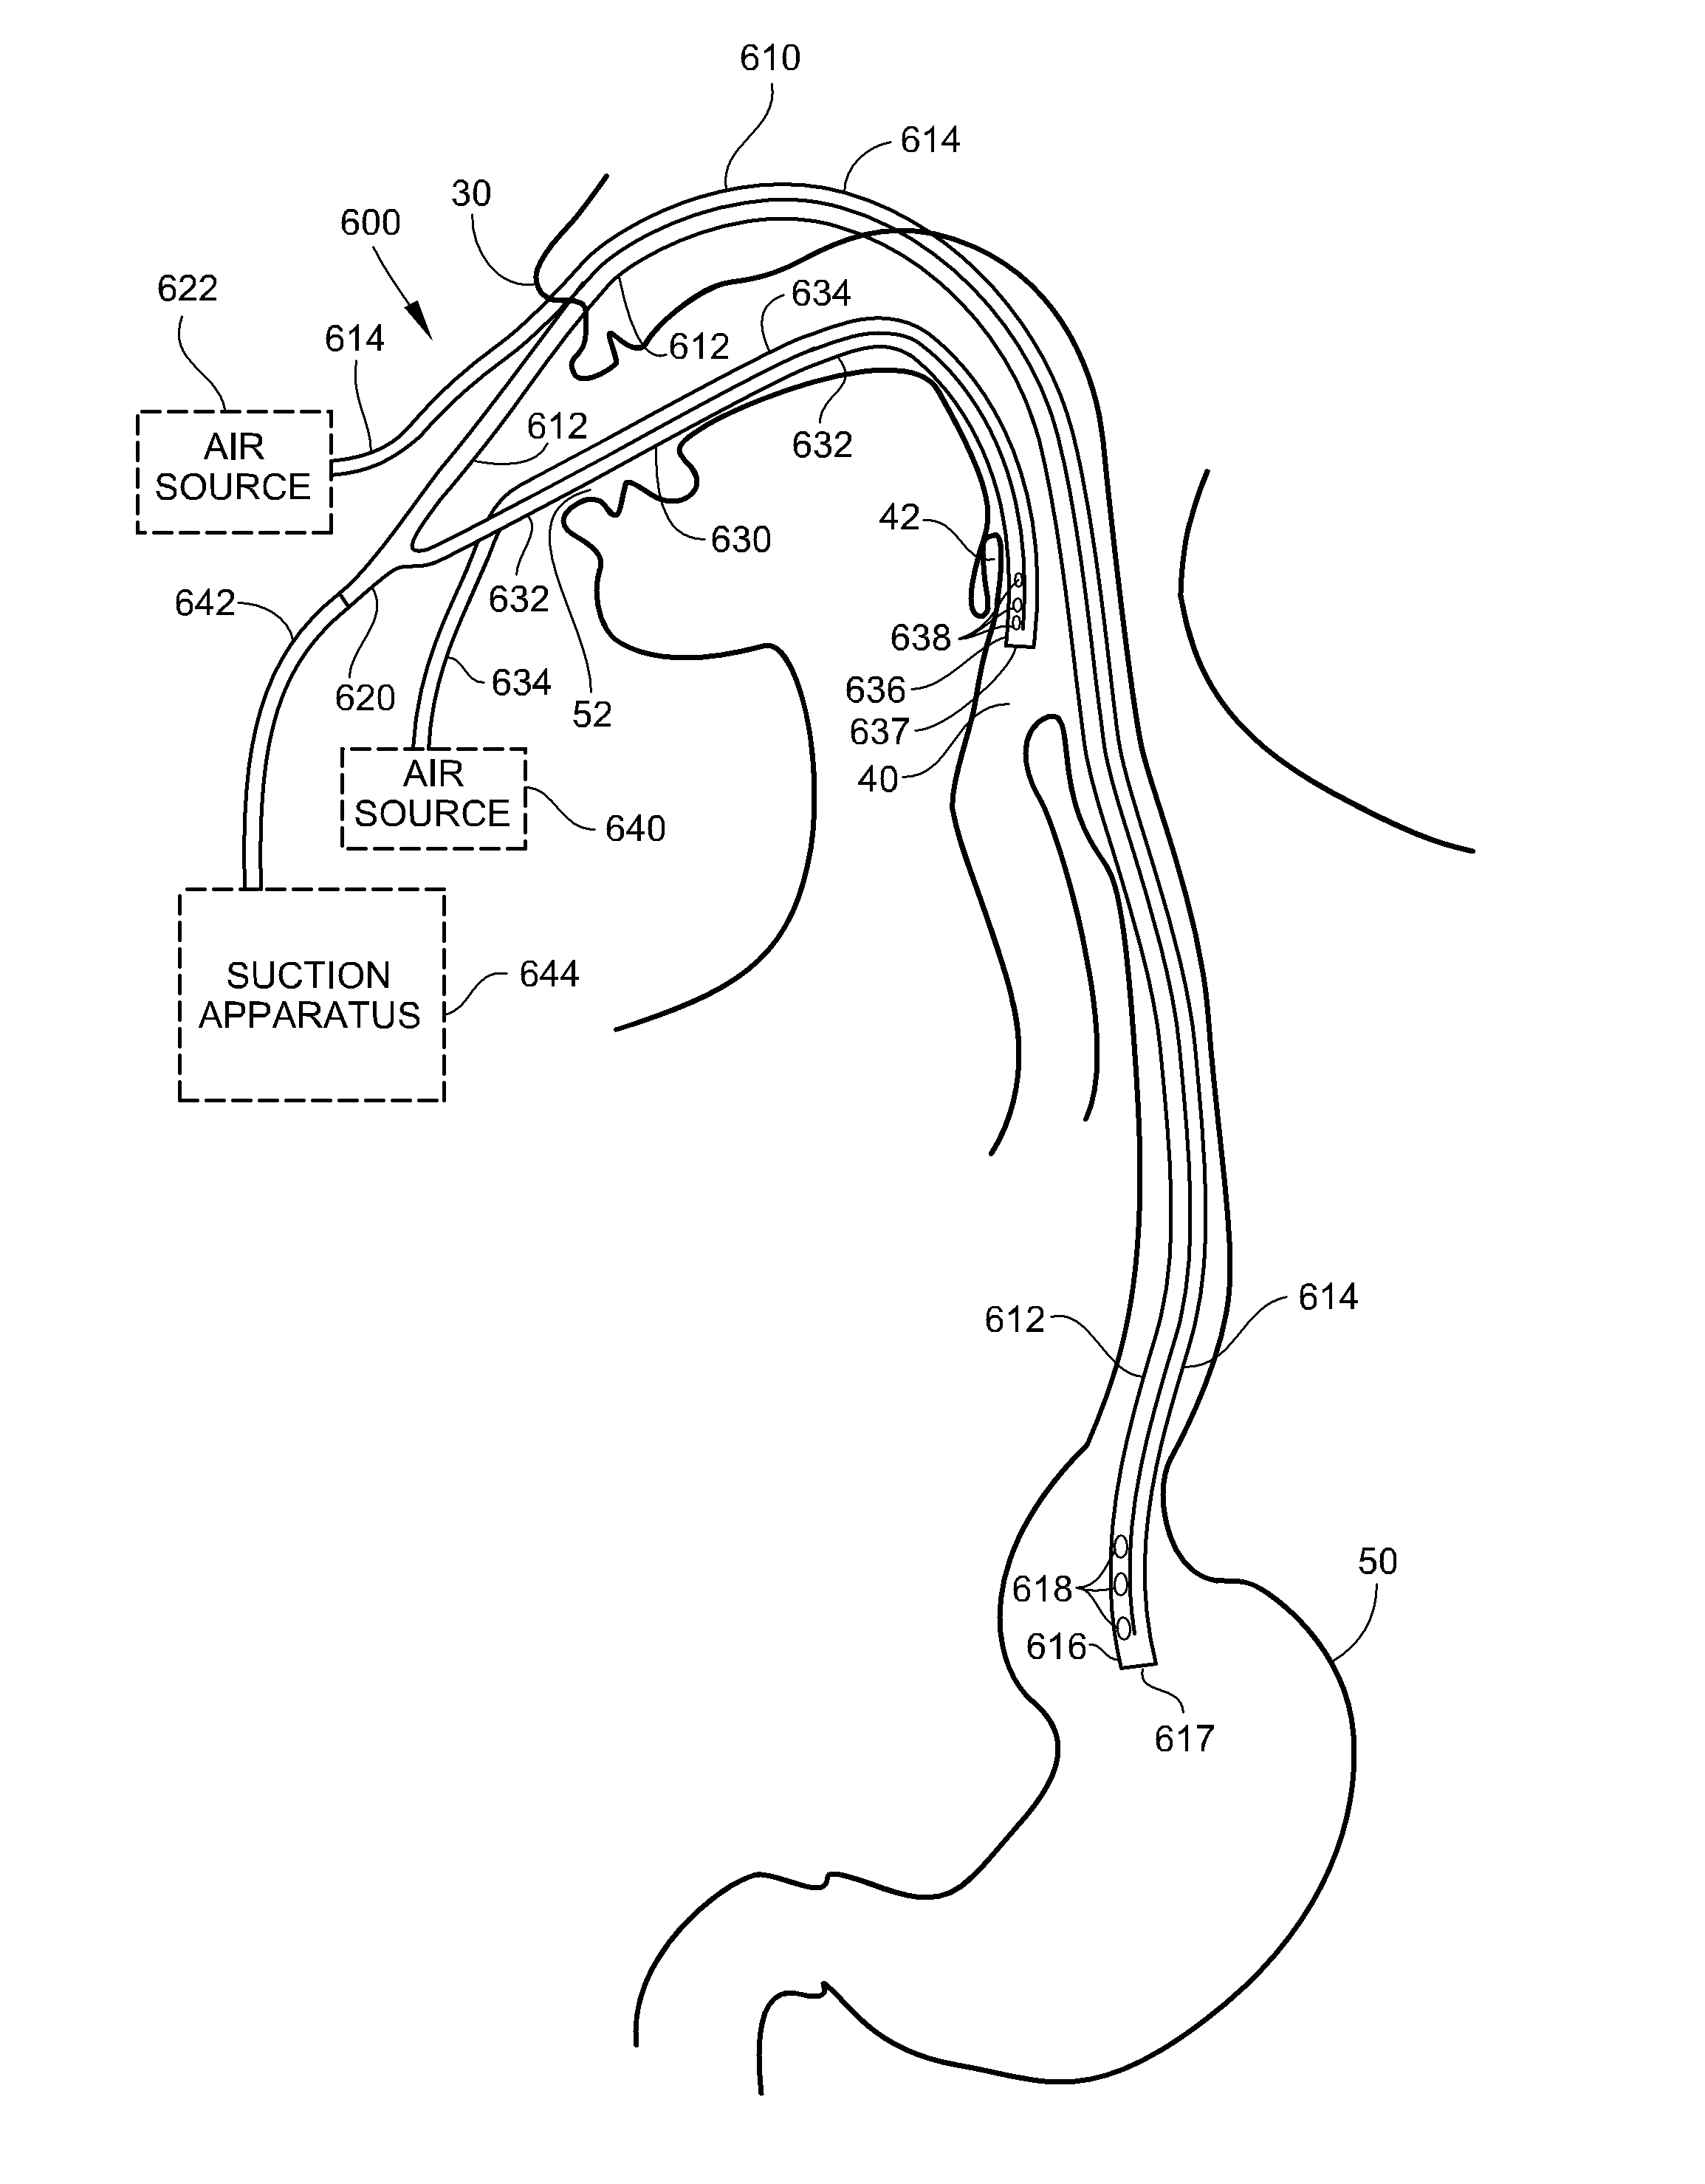 Medical Apparatus With Hypopharyngeal Suctioning Capability